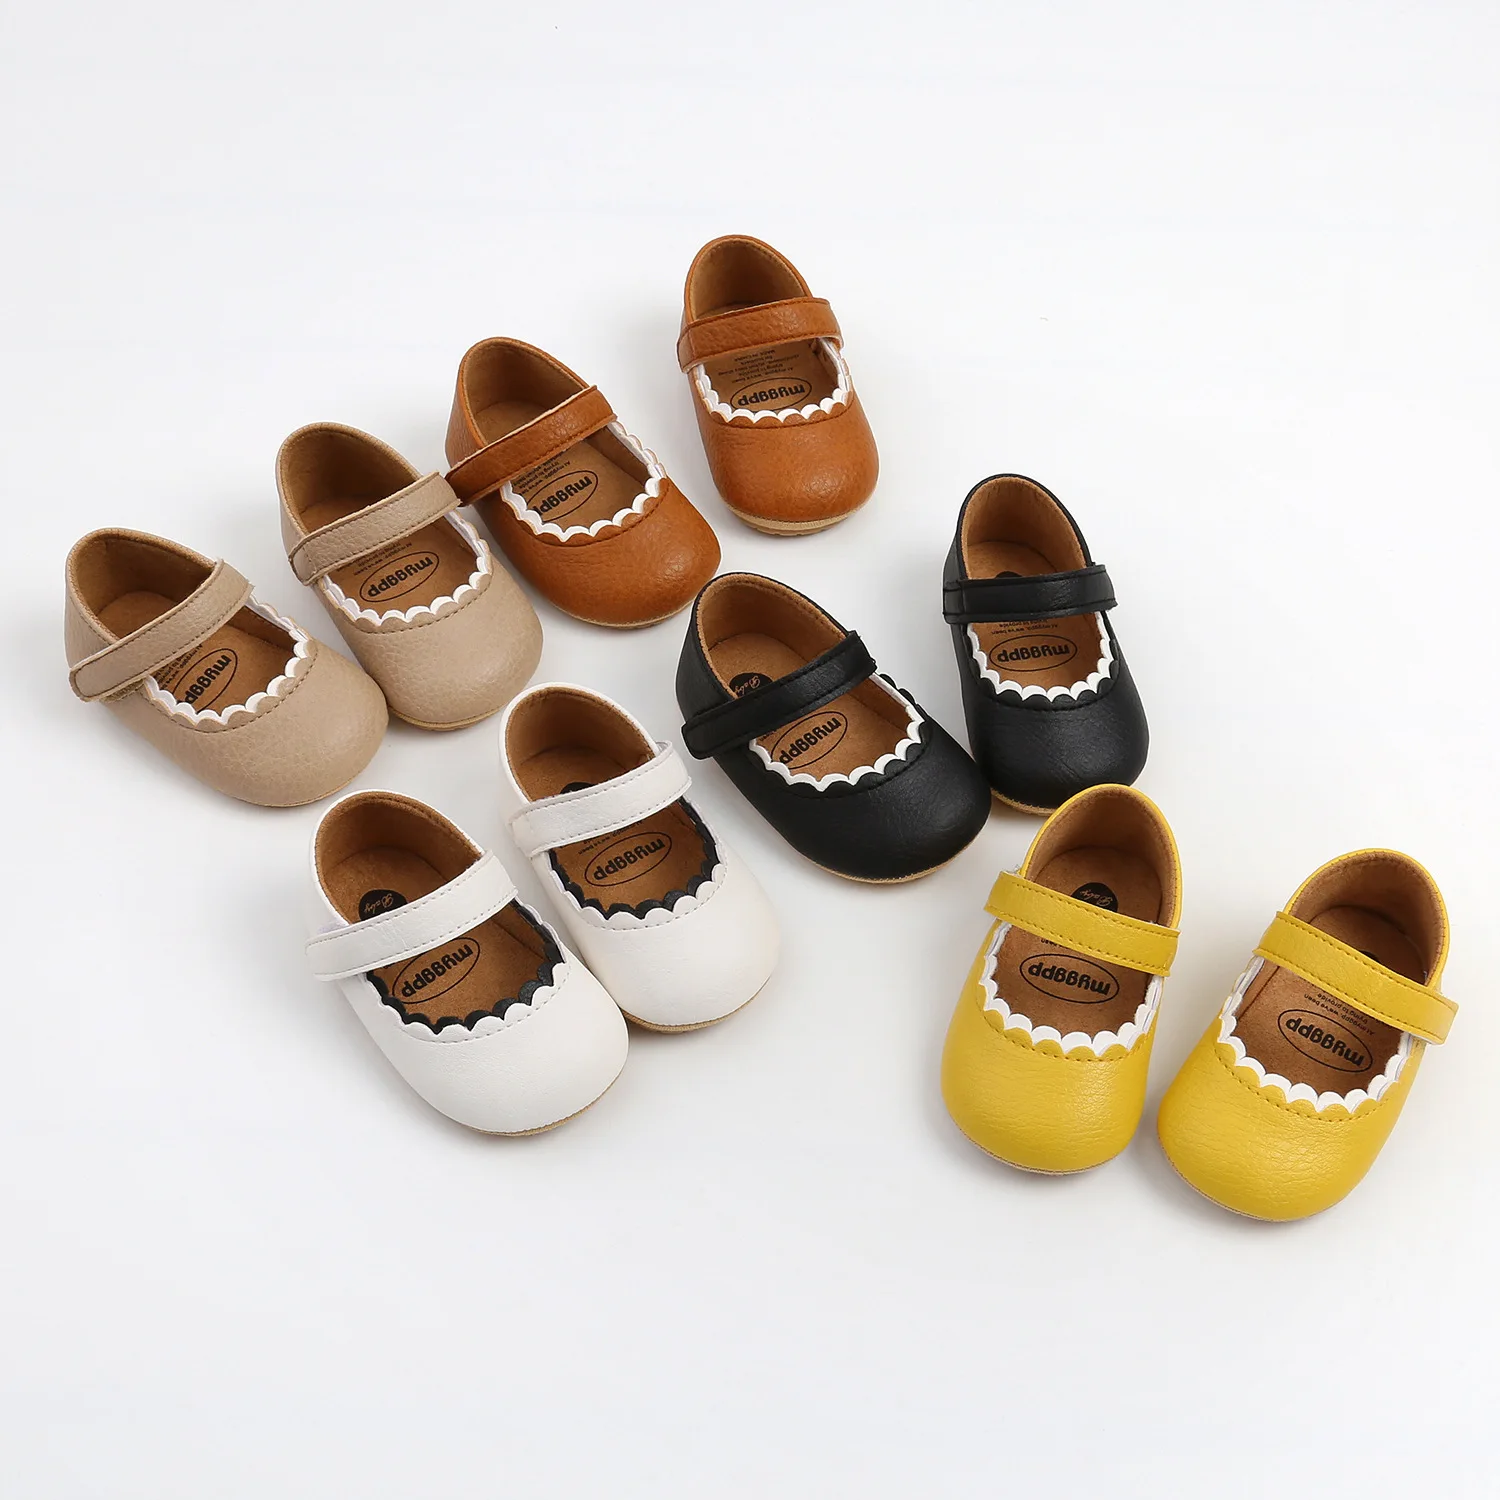 

Customized PU leather baby summer pre-walker shoes cute toddler baby girls dress shoes princess shoes for 0-12M, White/black/yellow/light khaki/brown